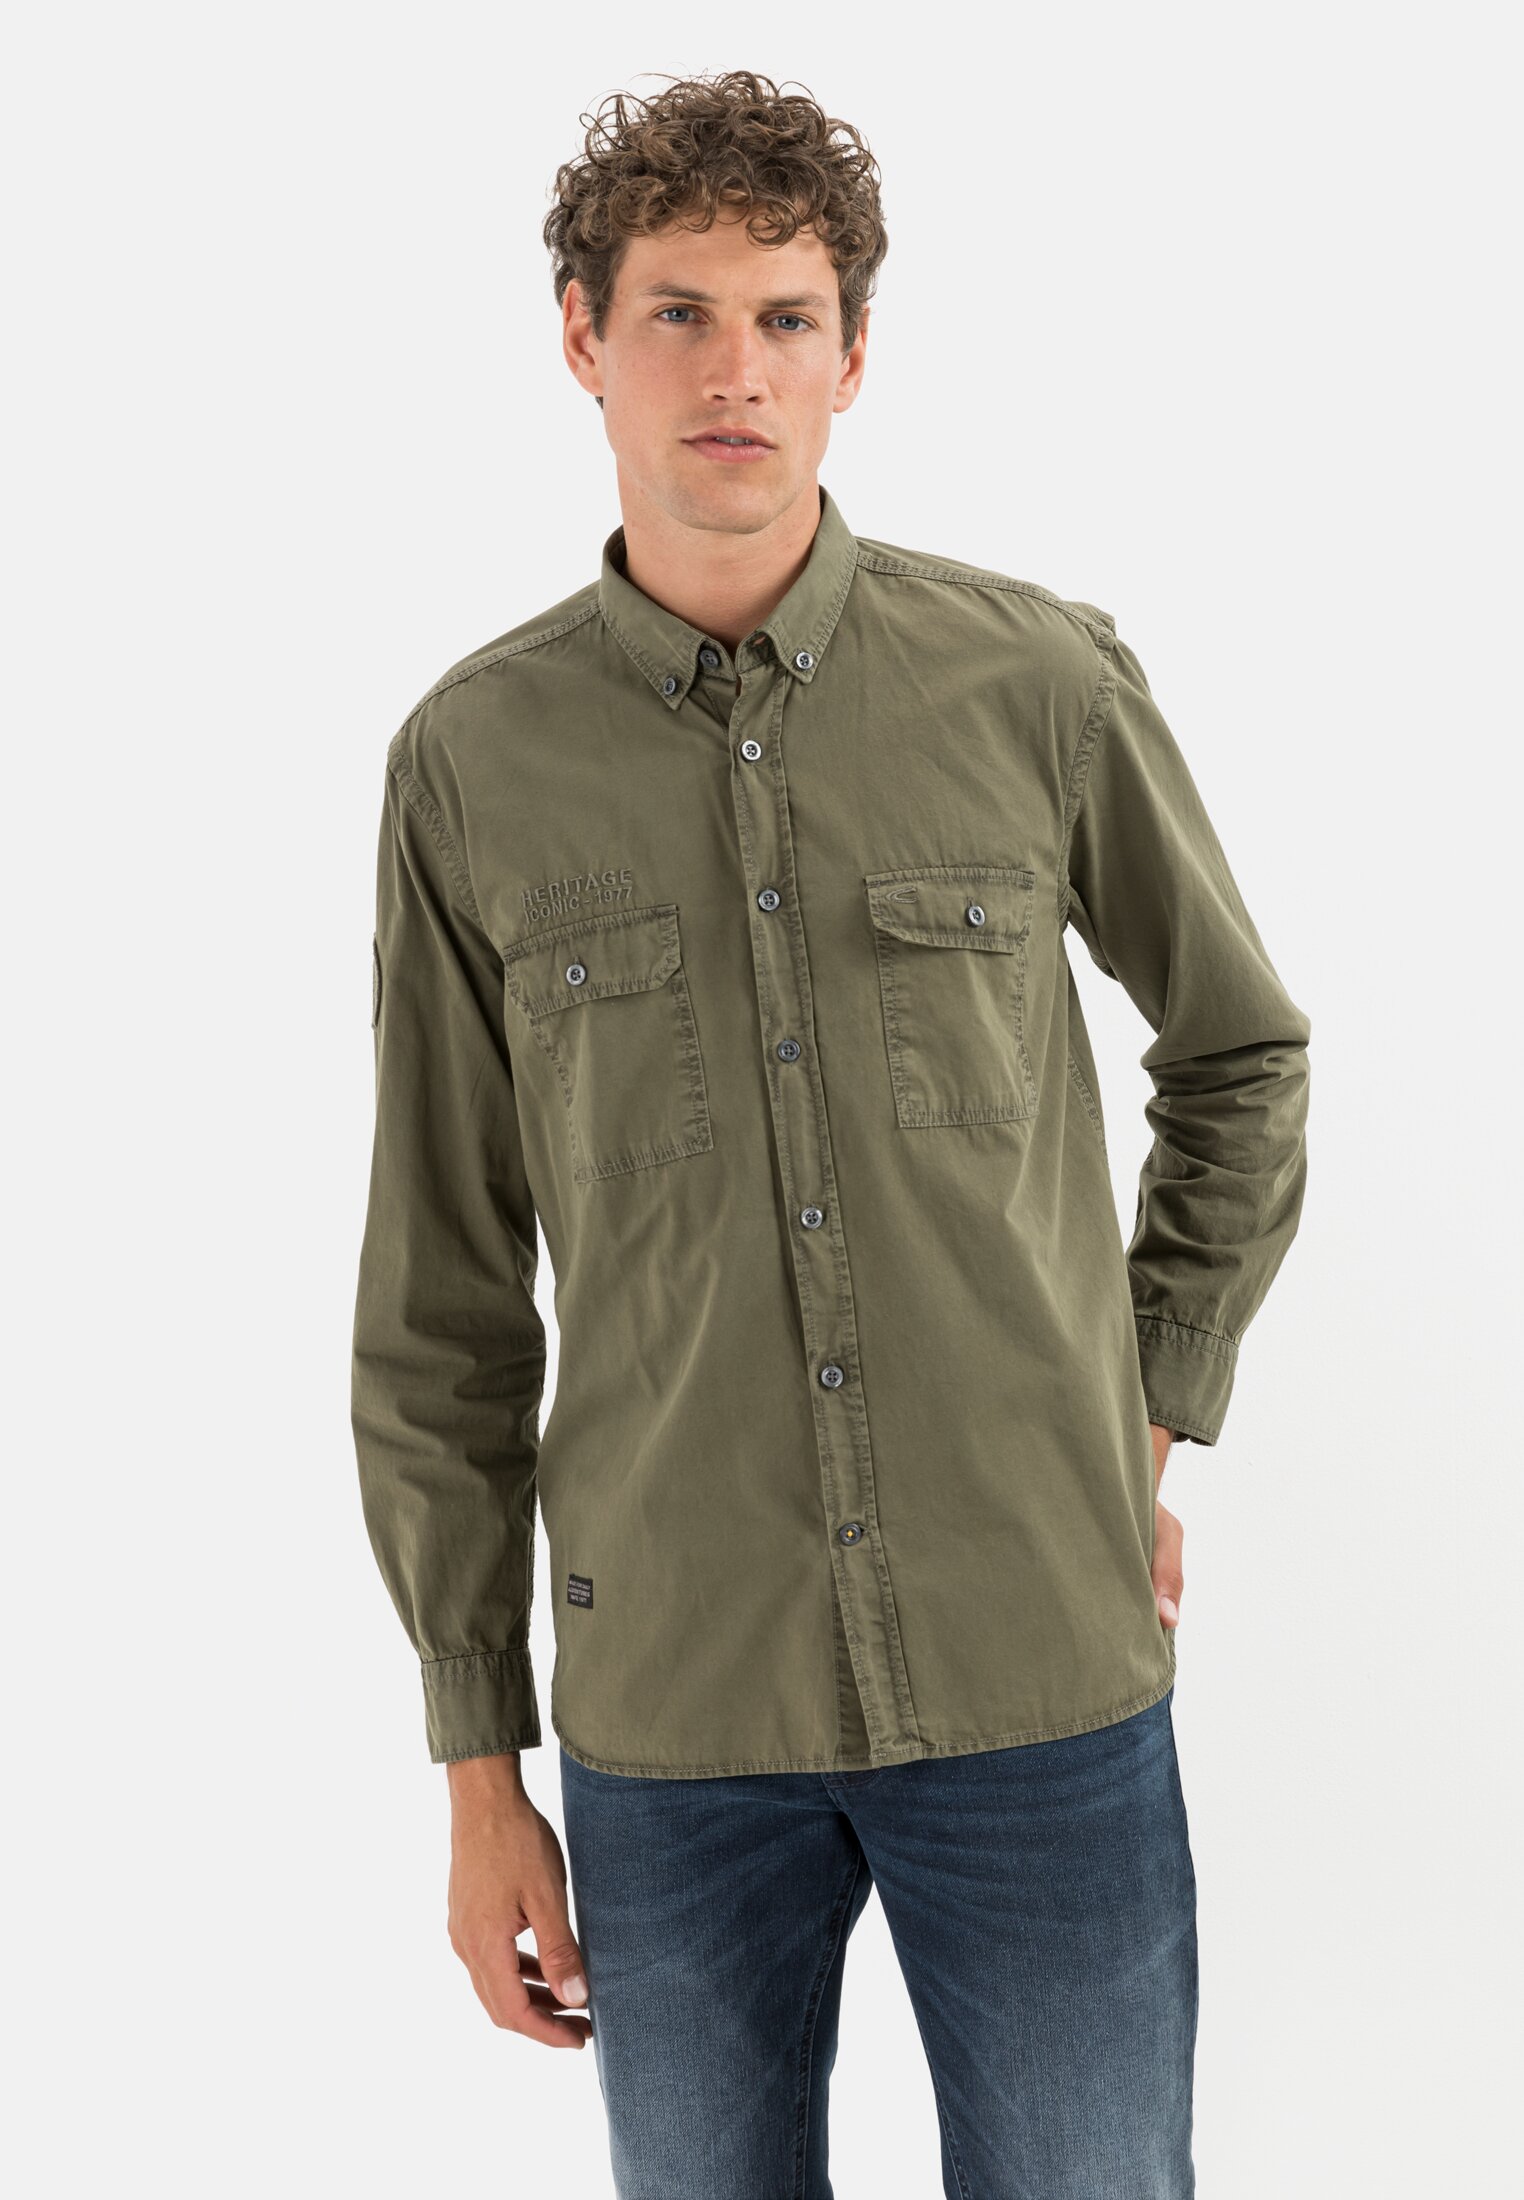 Camel Active Longsleeve shirt made from pure cotton